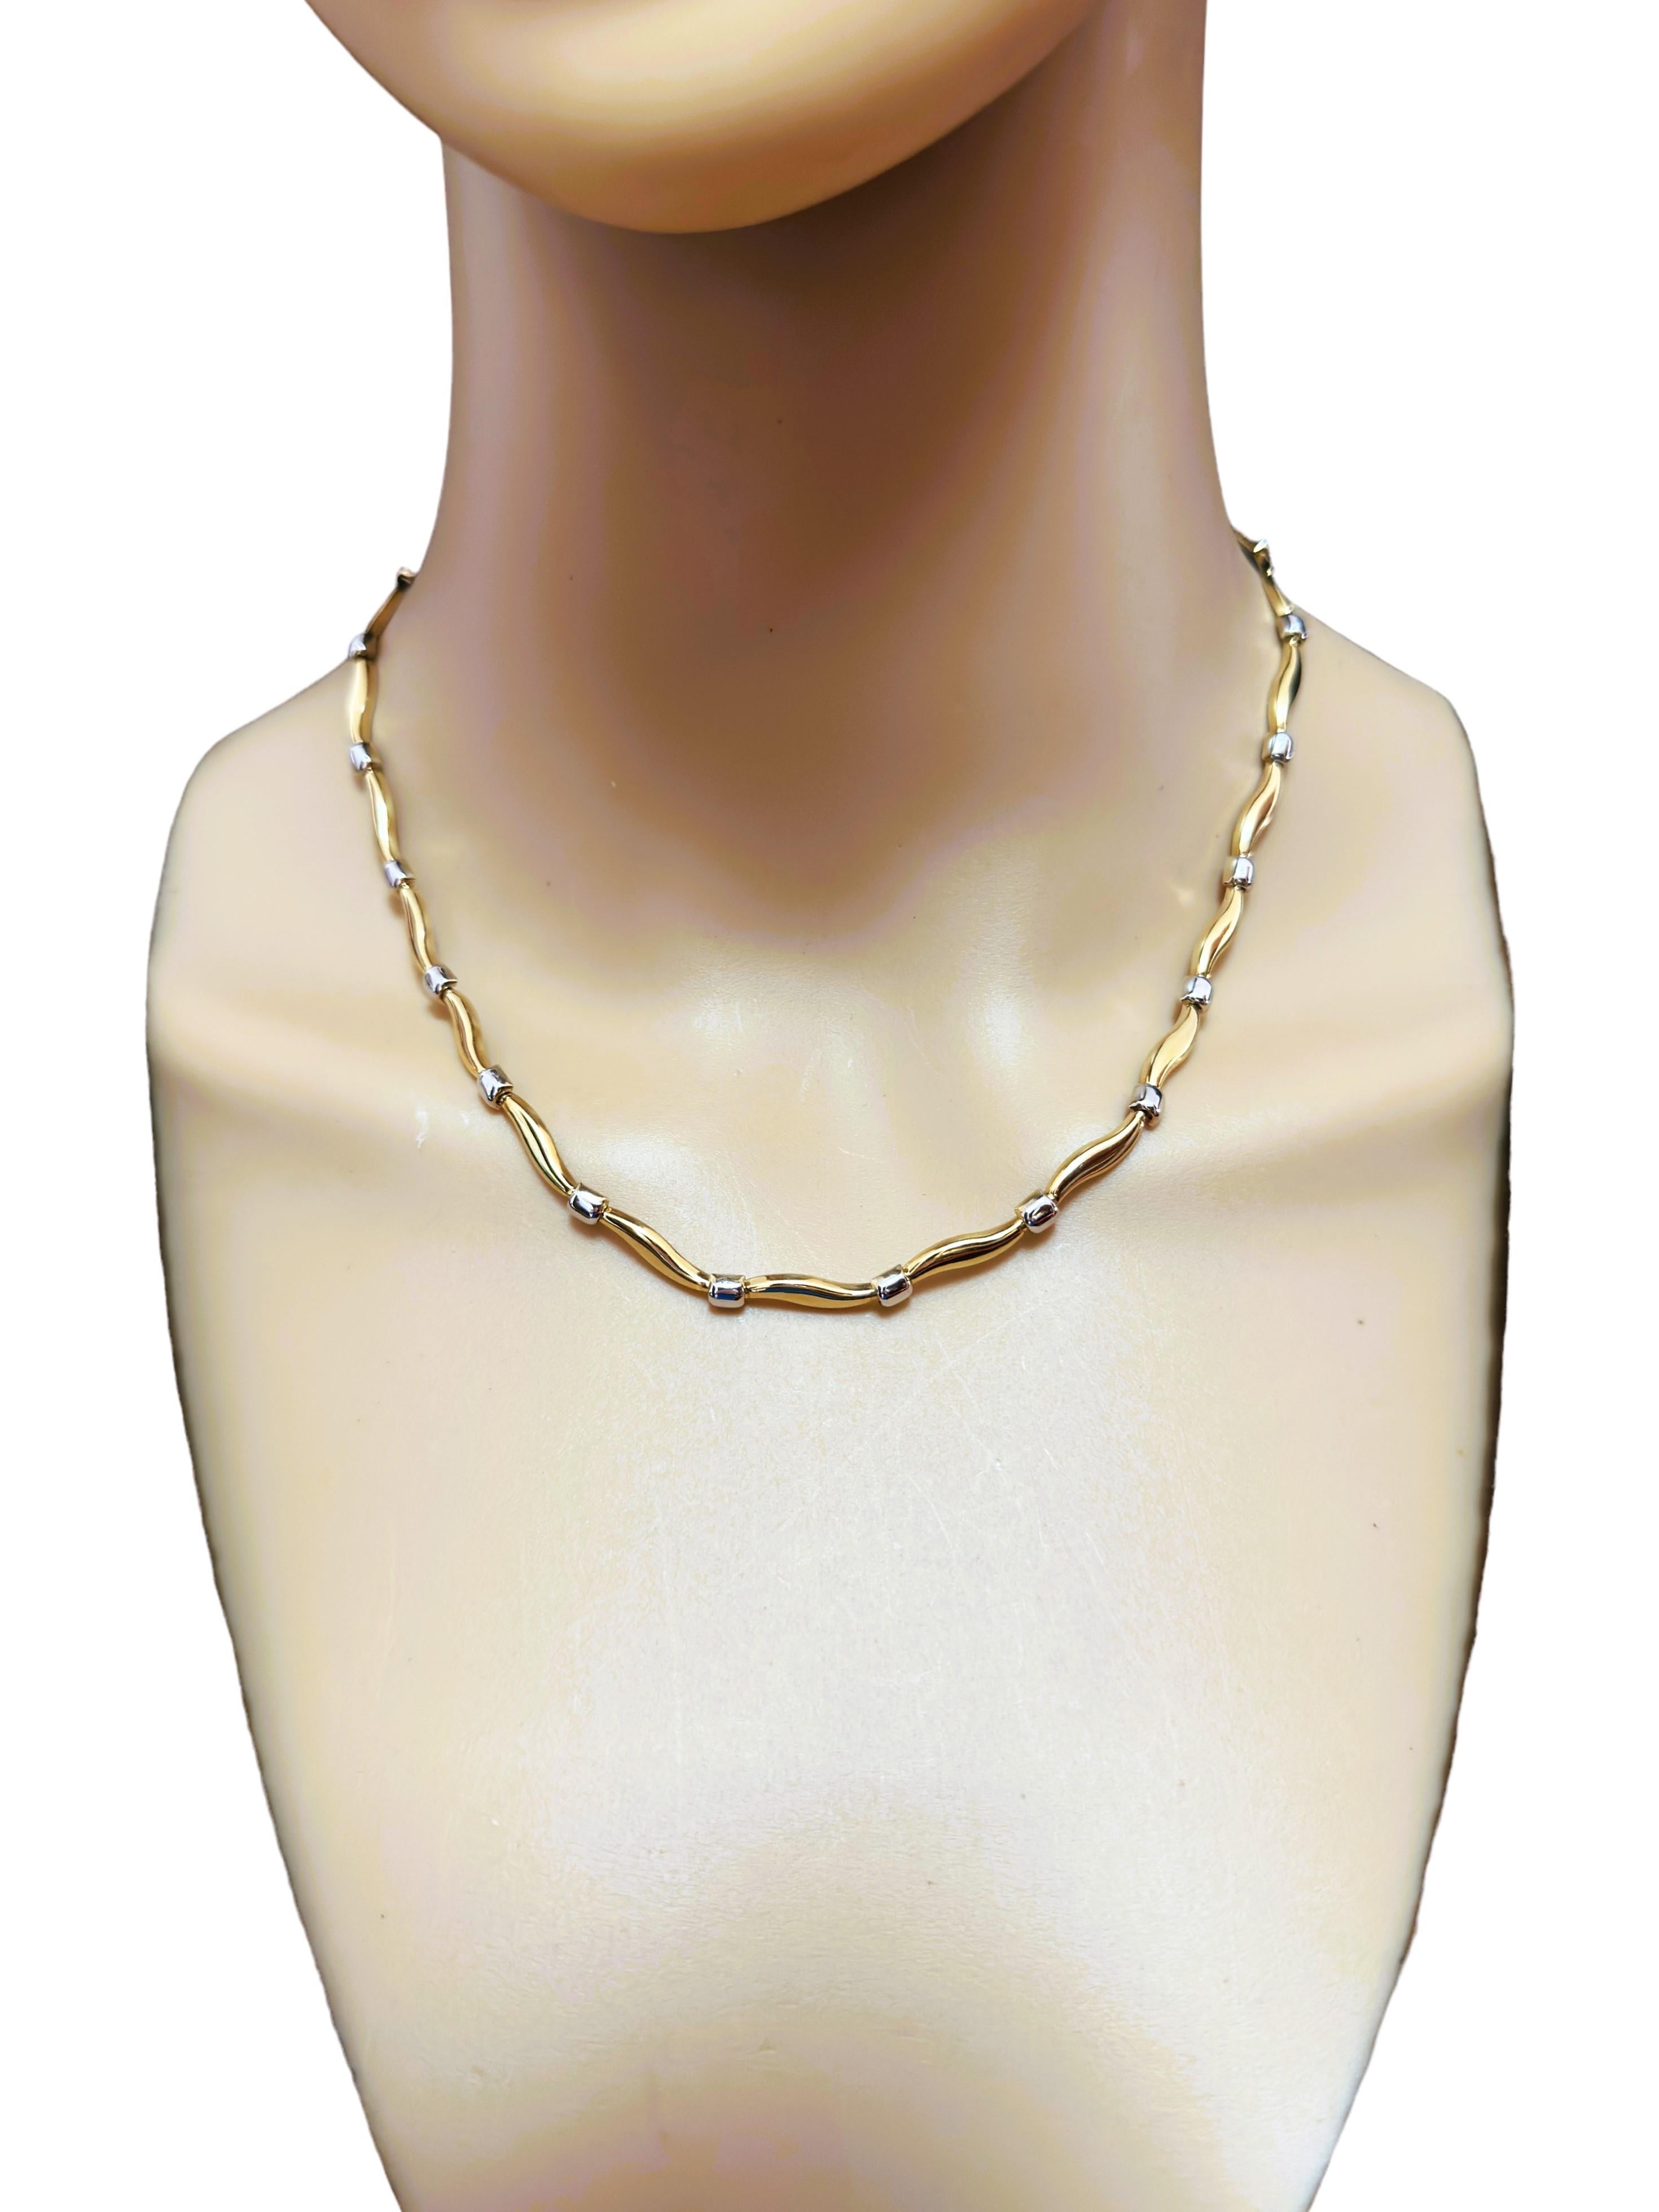 14k Yellow & White Gold Two-Tone Necklace 17.25 Inches 9.50 Grams In Excellent Condition For Sale In Eagan, MN